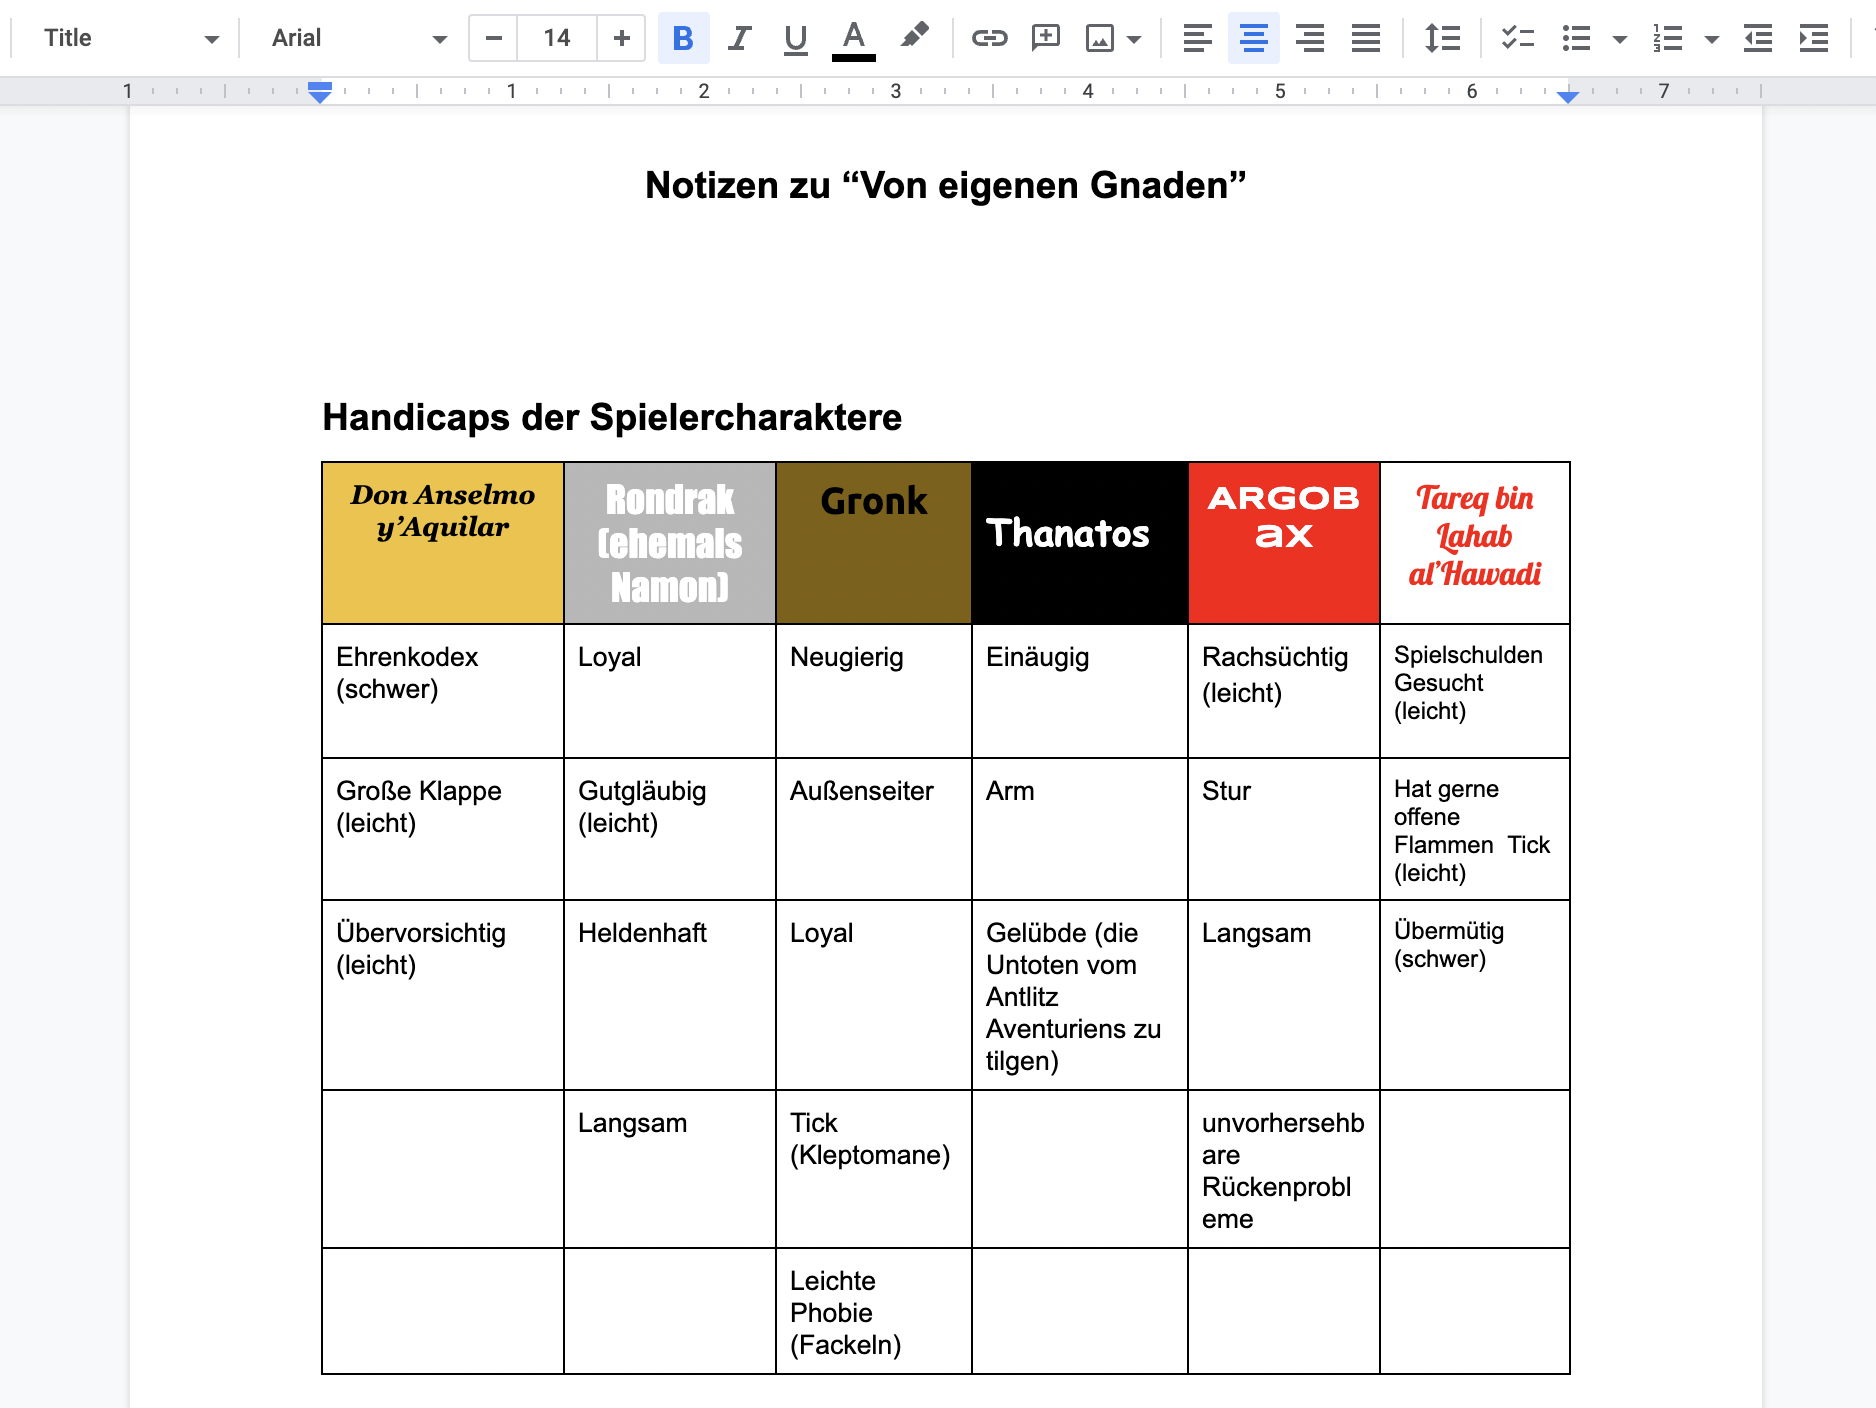 Fig. 2: “Notes on ‘By their own grace’,” Screenshot from the 2012 Google Doc listing the “Handicaps” for the characters of a Savage Worlds campaign.